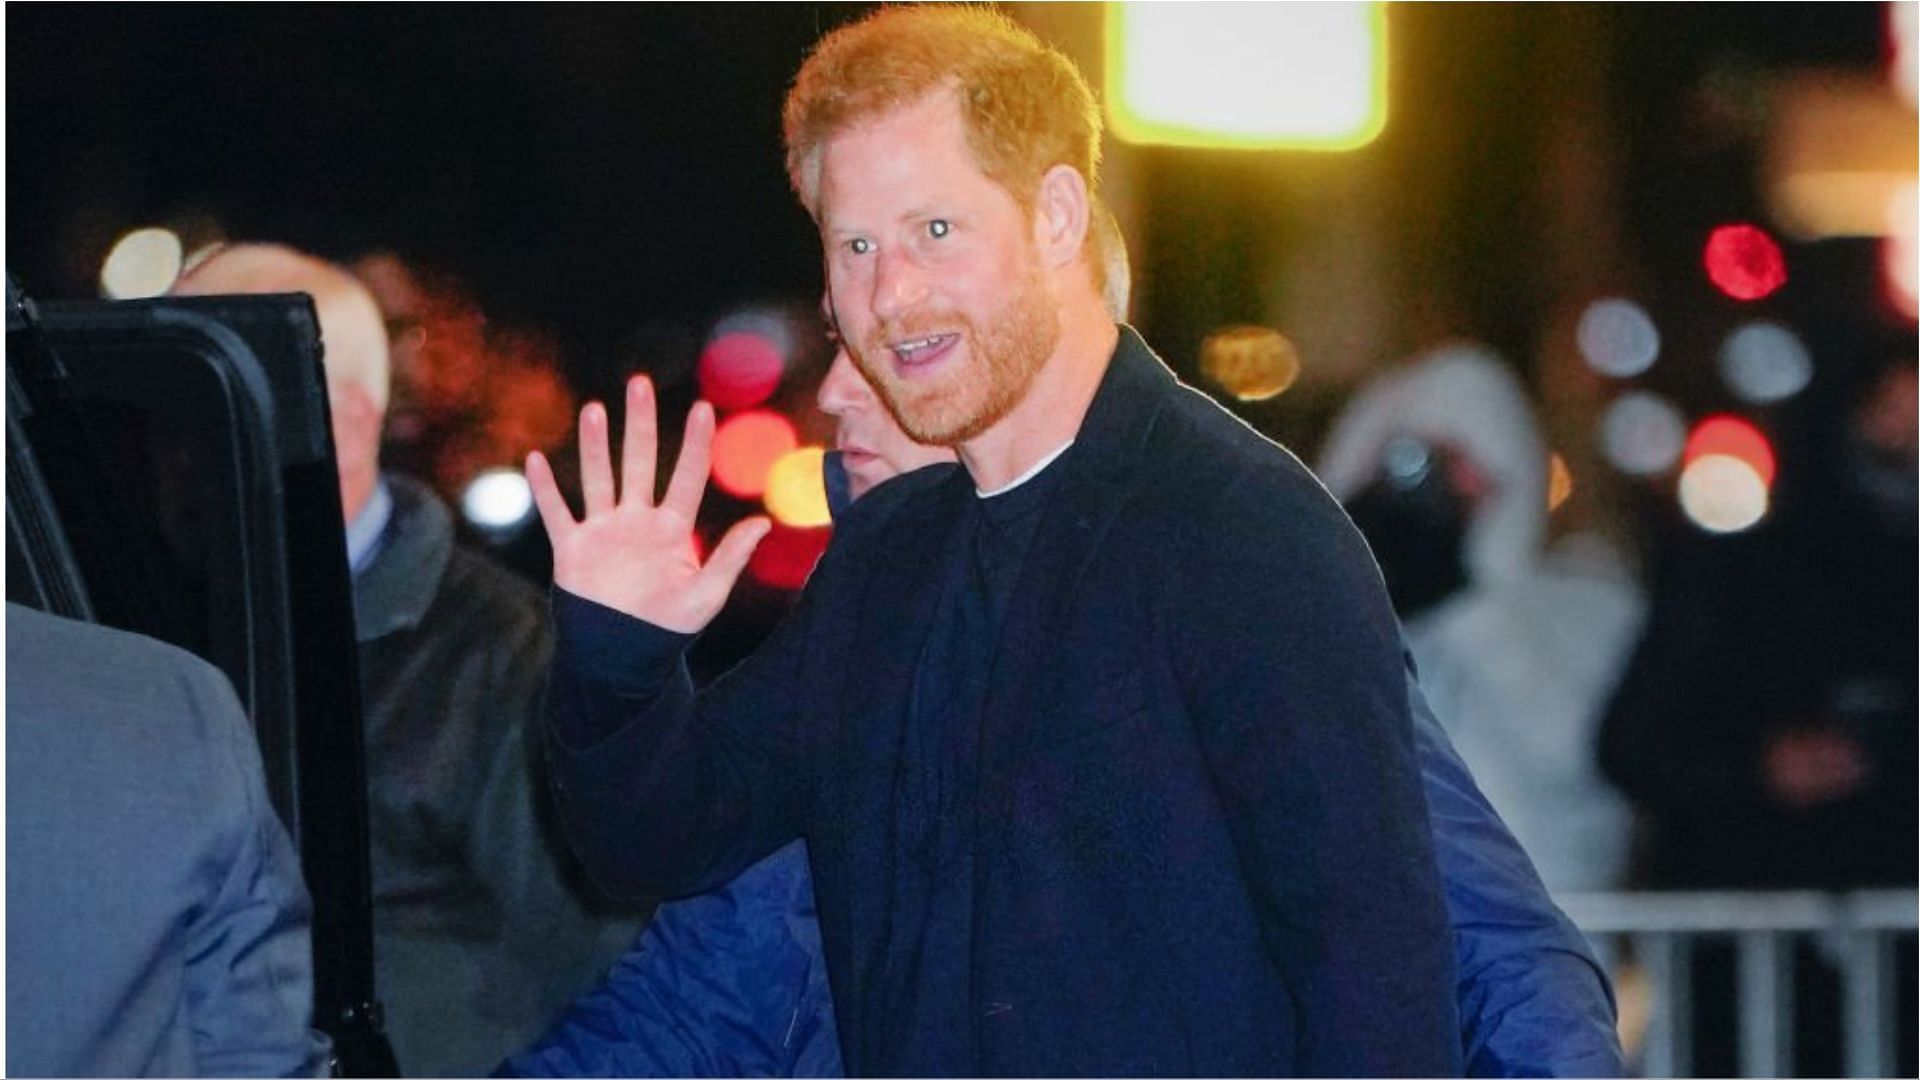 Prince Harry&#039;s lawsuit claimed that his privacy was breached (Image via Gotham/Getty Images)